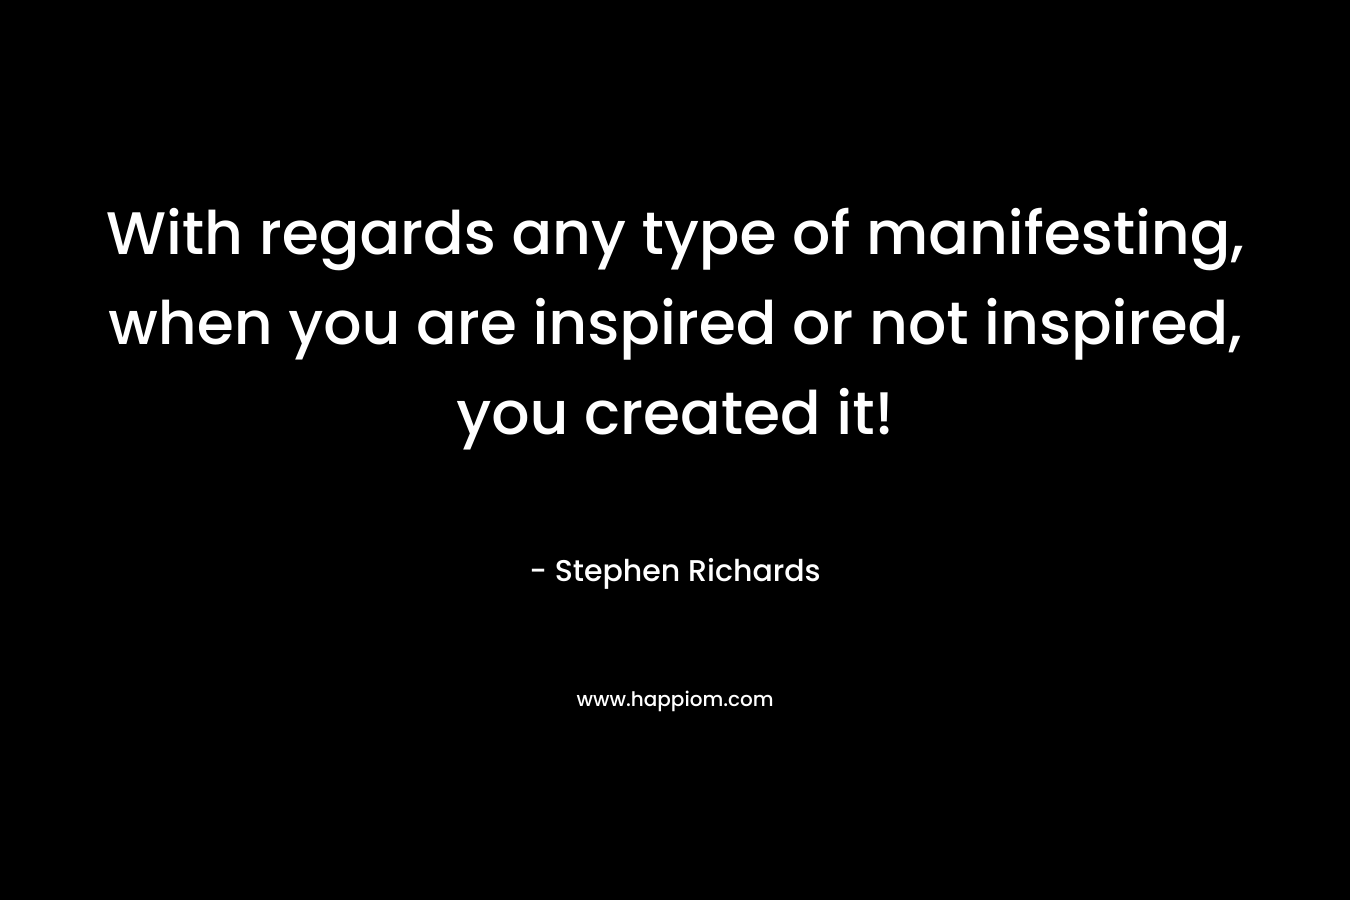 With regards any type of manifesting, when you are inspired or not inspired, you created it! – Stephen Richards